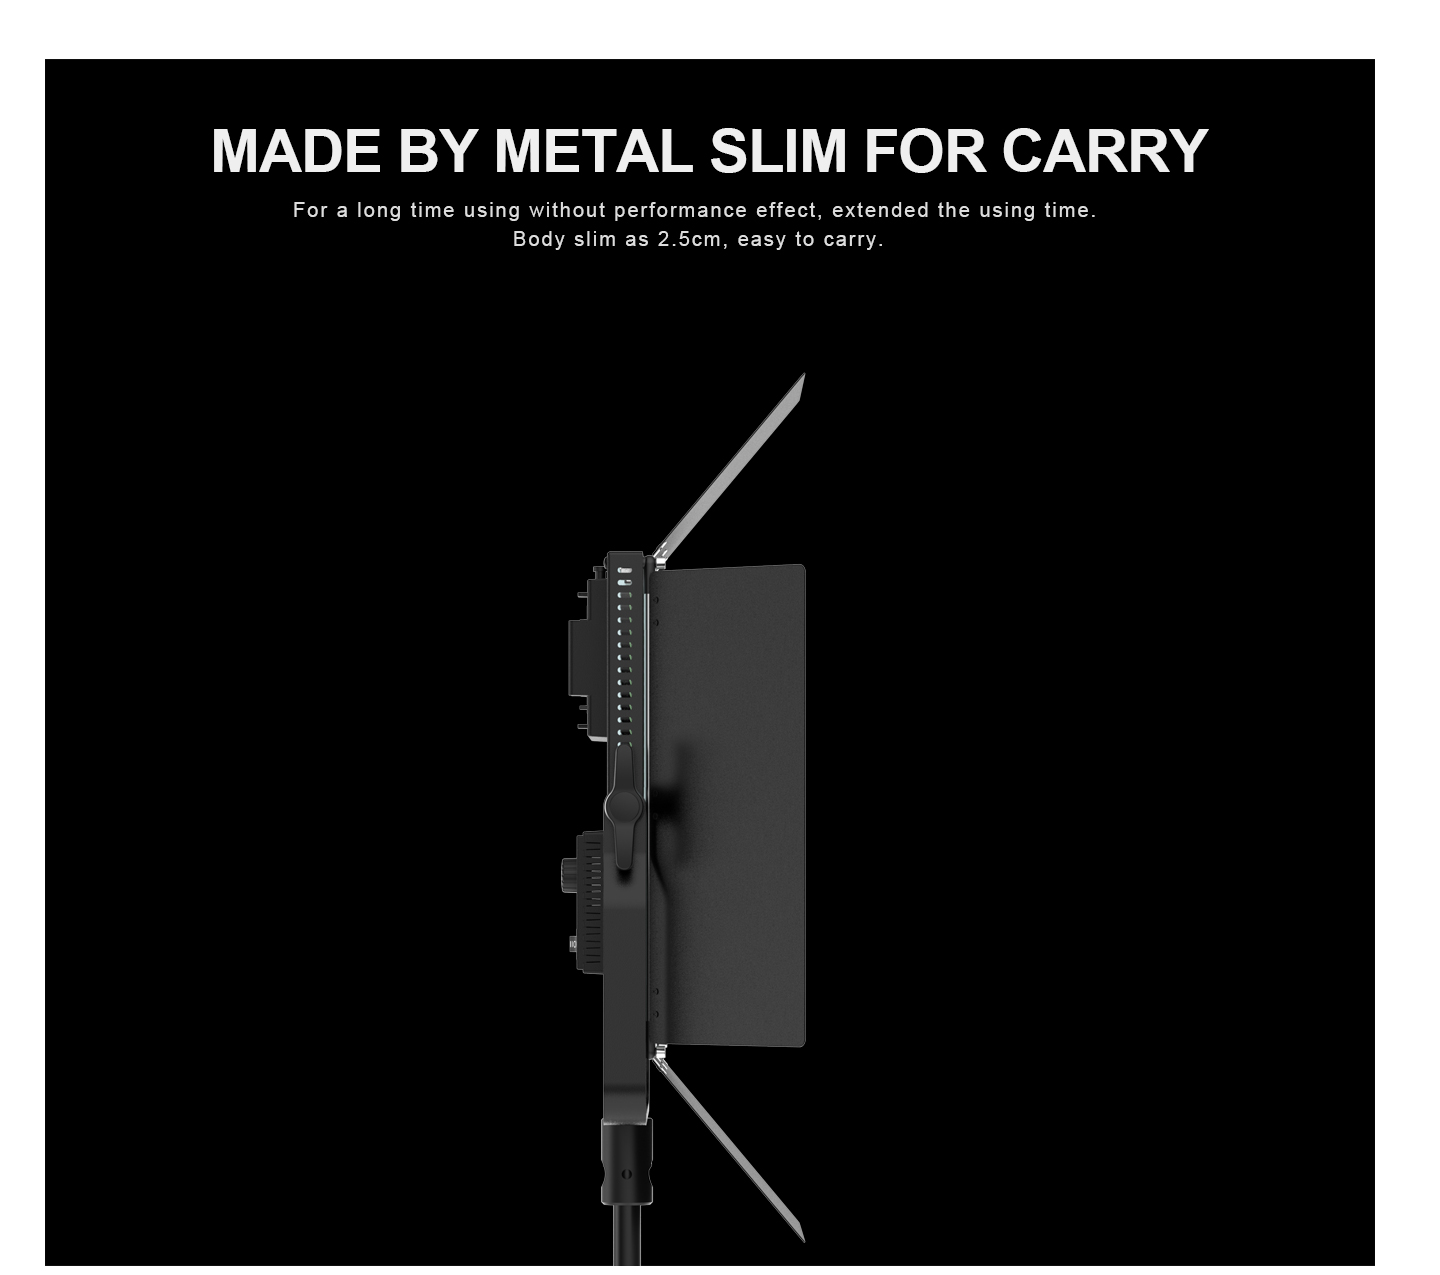 MADE BY METAL SLIM FOR CARRY